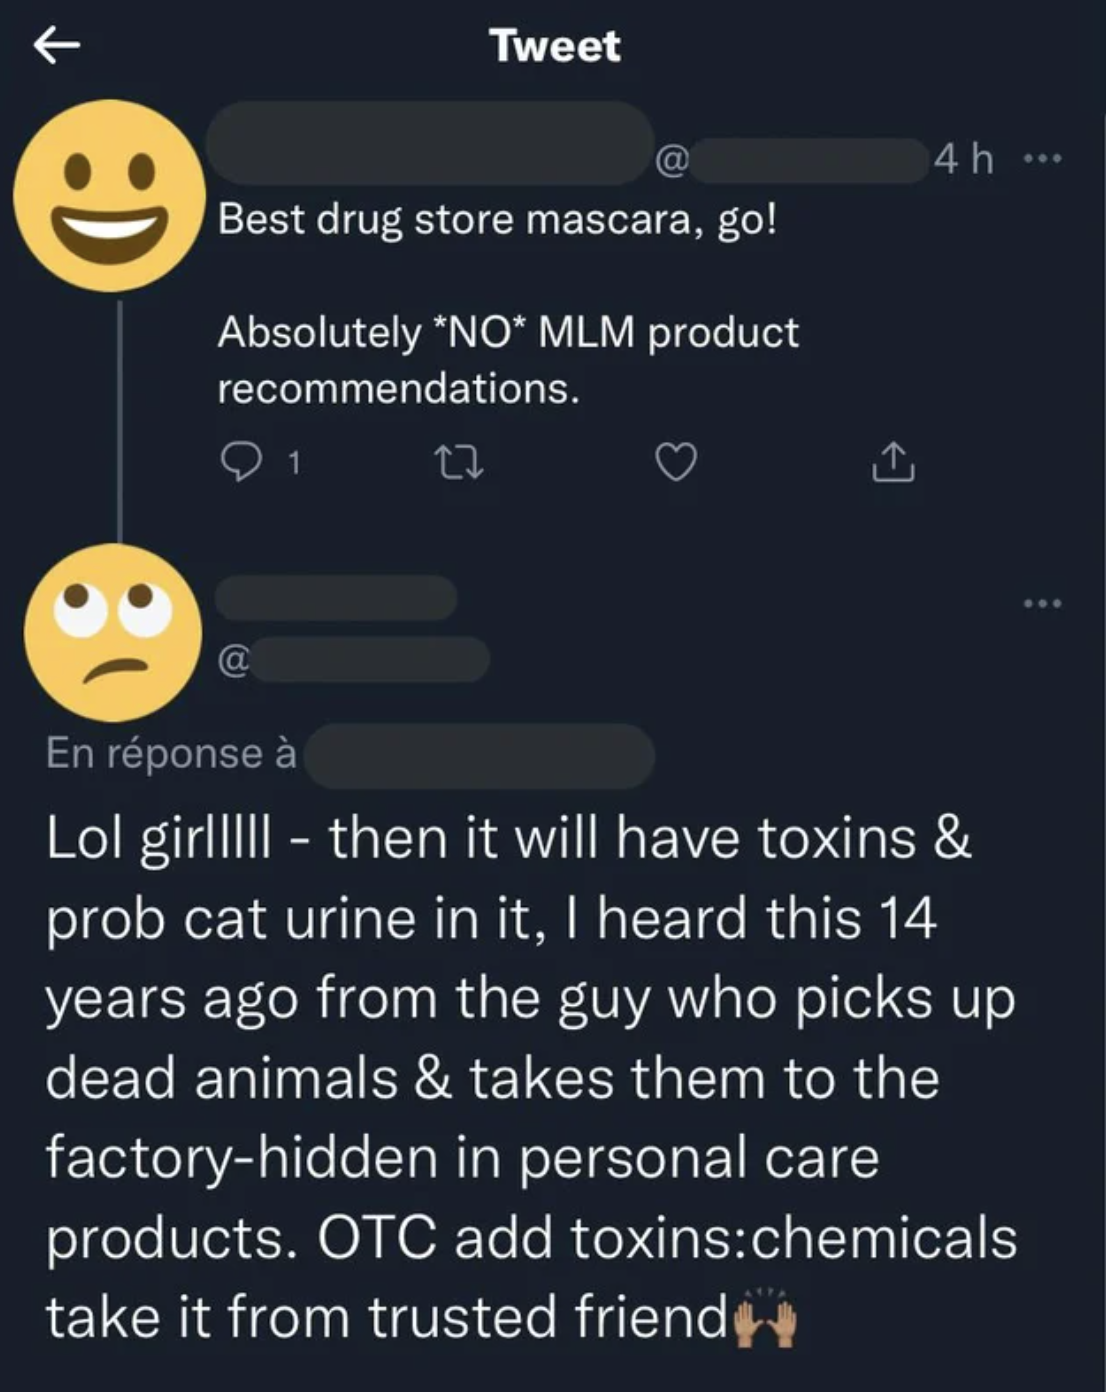 poster saying the product will have toxins